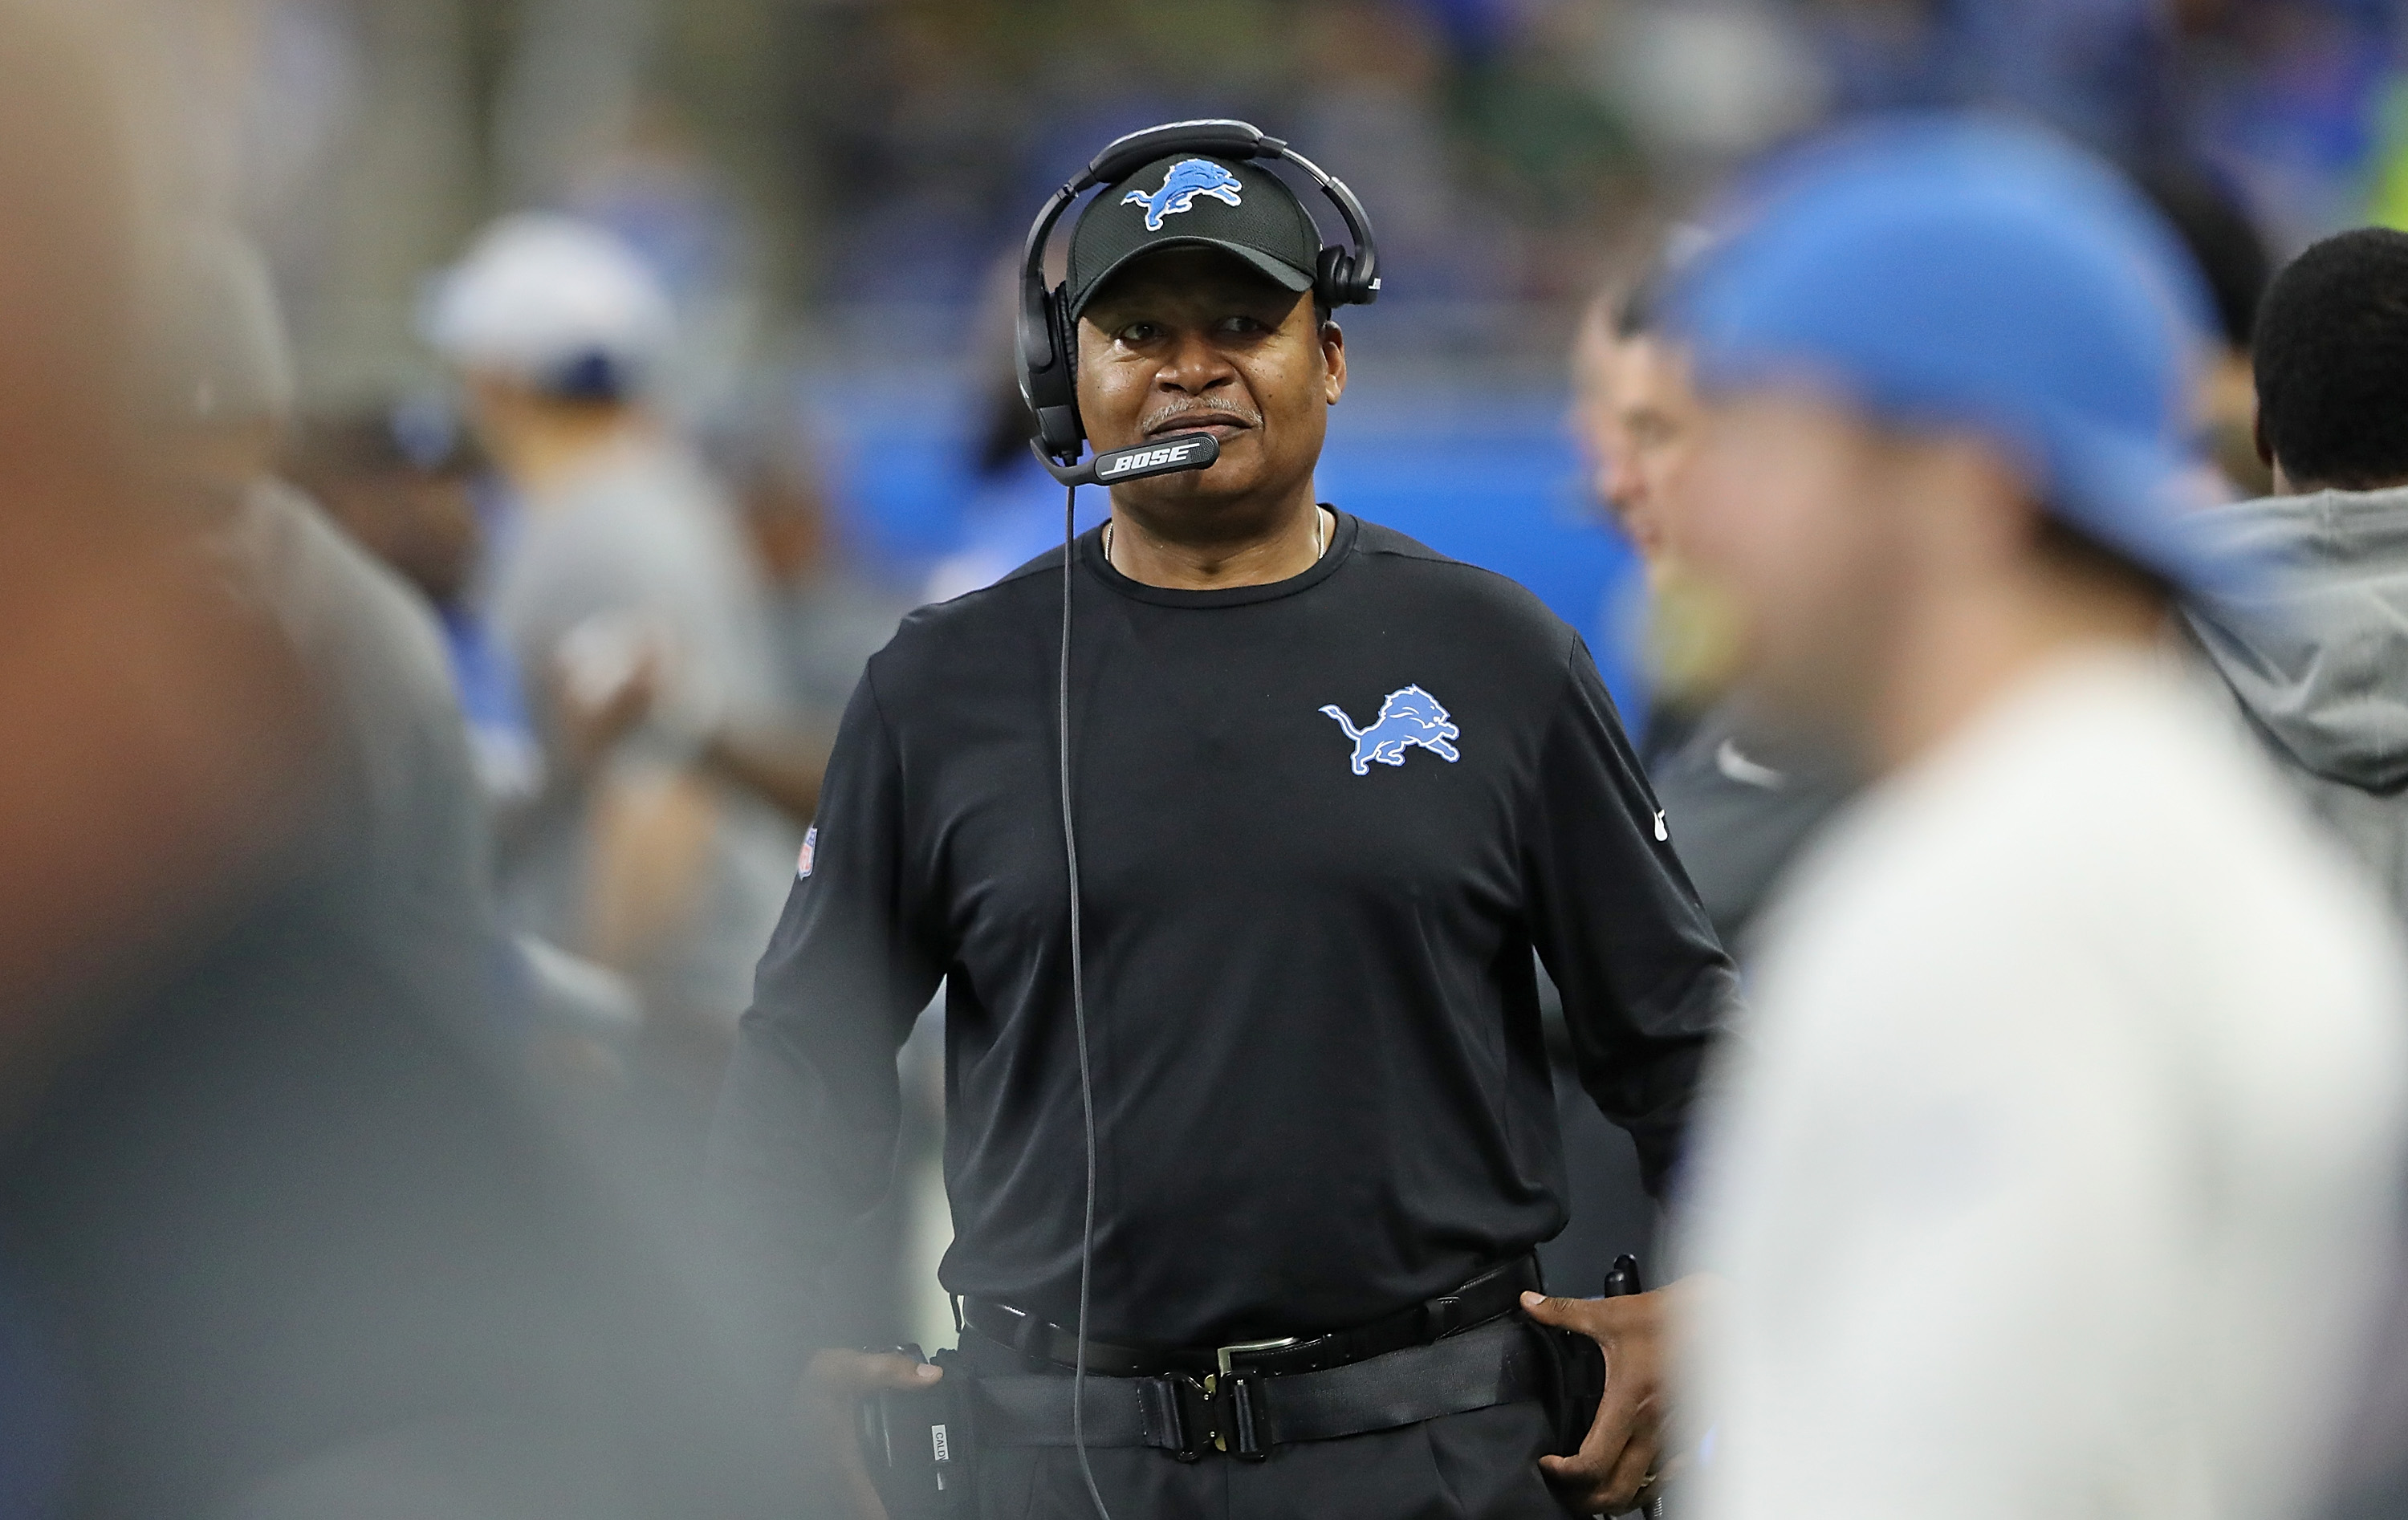 Detroit Lions head football coach Jim Caldwell watches the action during the game against the Green Bay Packers at Ford Field on December 31, 2017 in Detroit, Michigan.